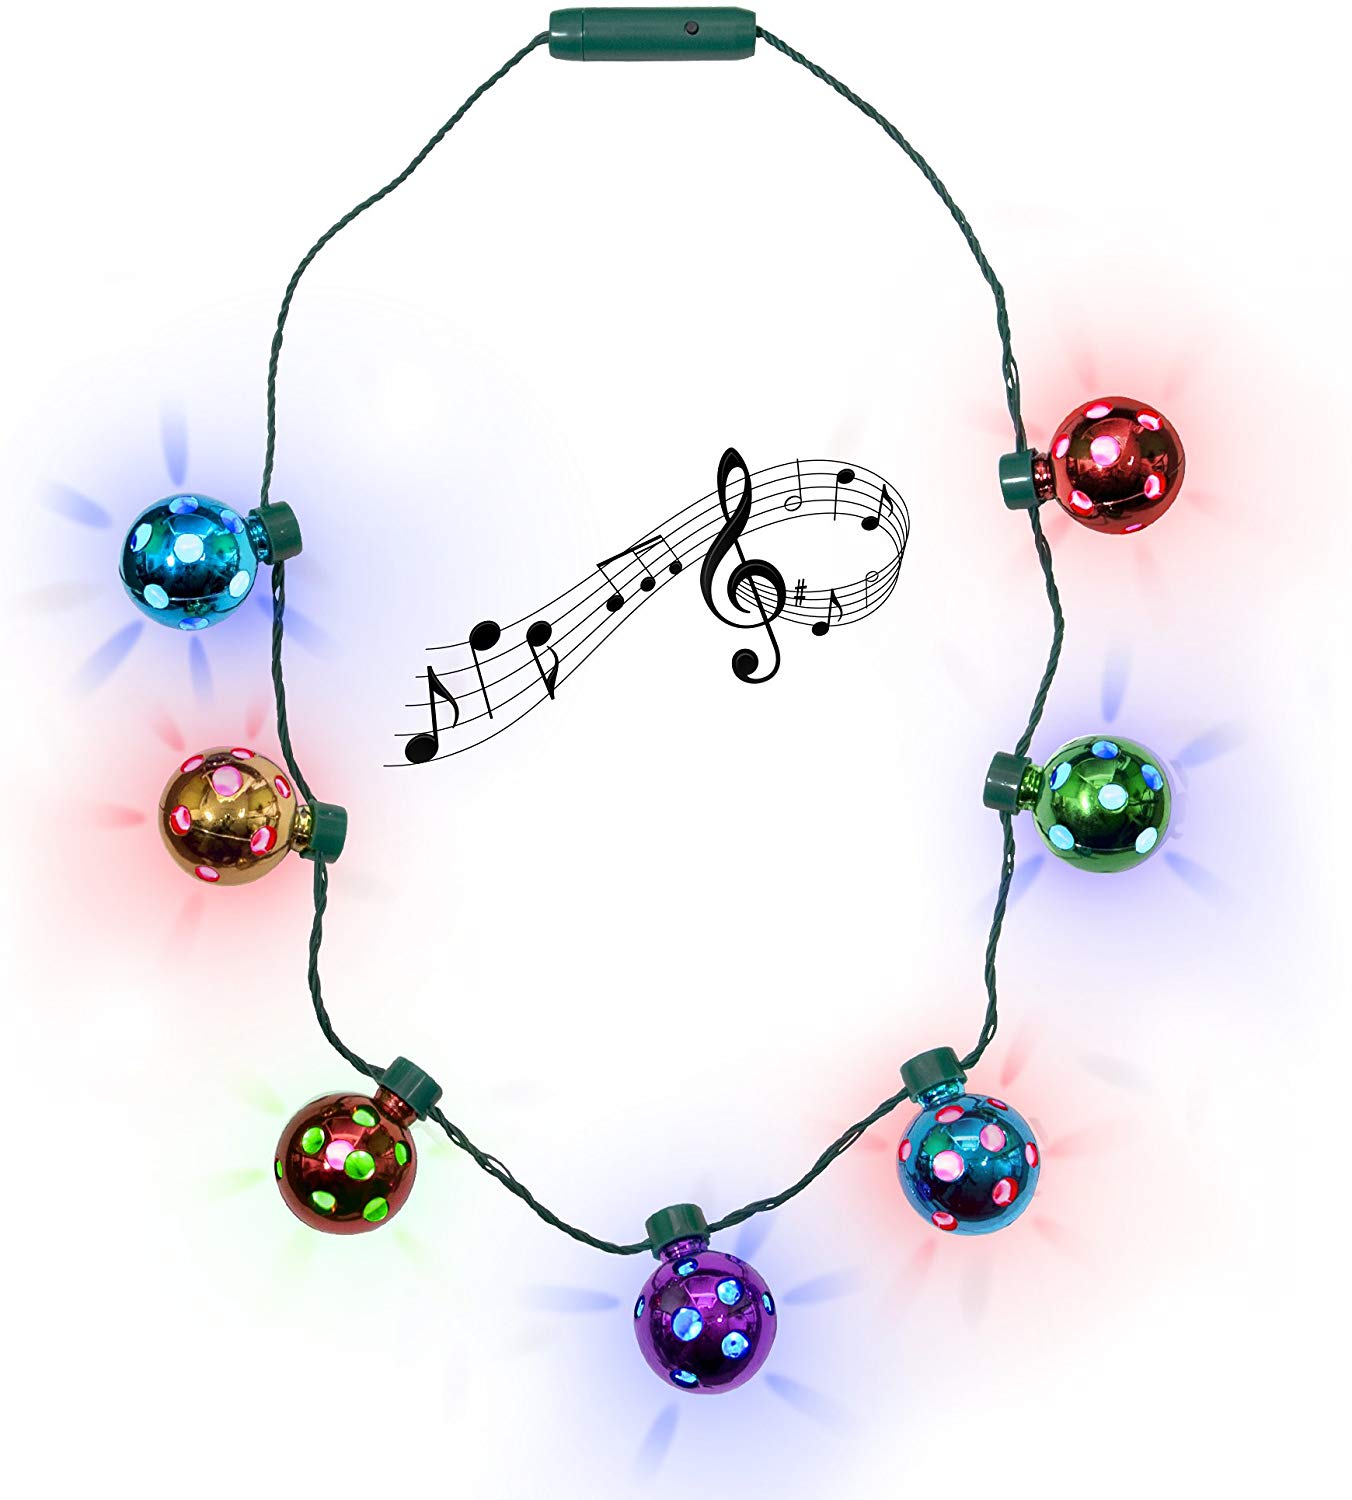 LED Holiday Jingle Bell Necklace